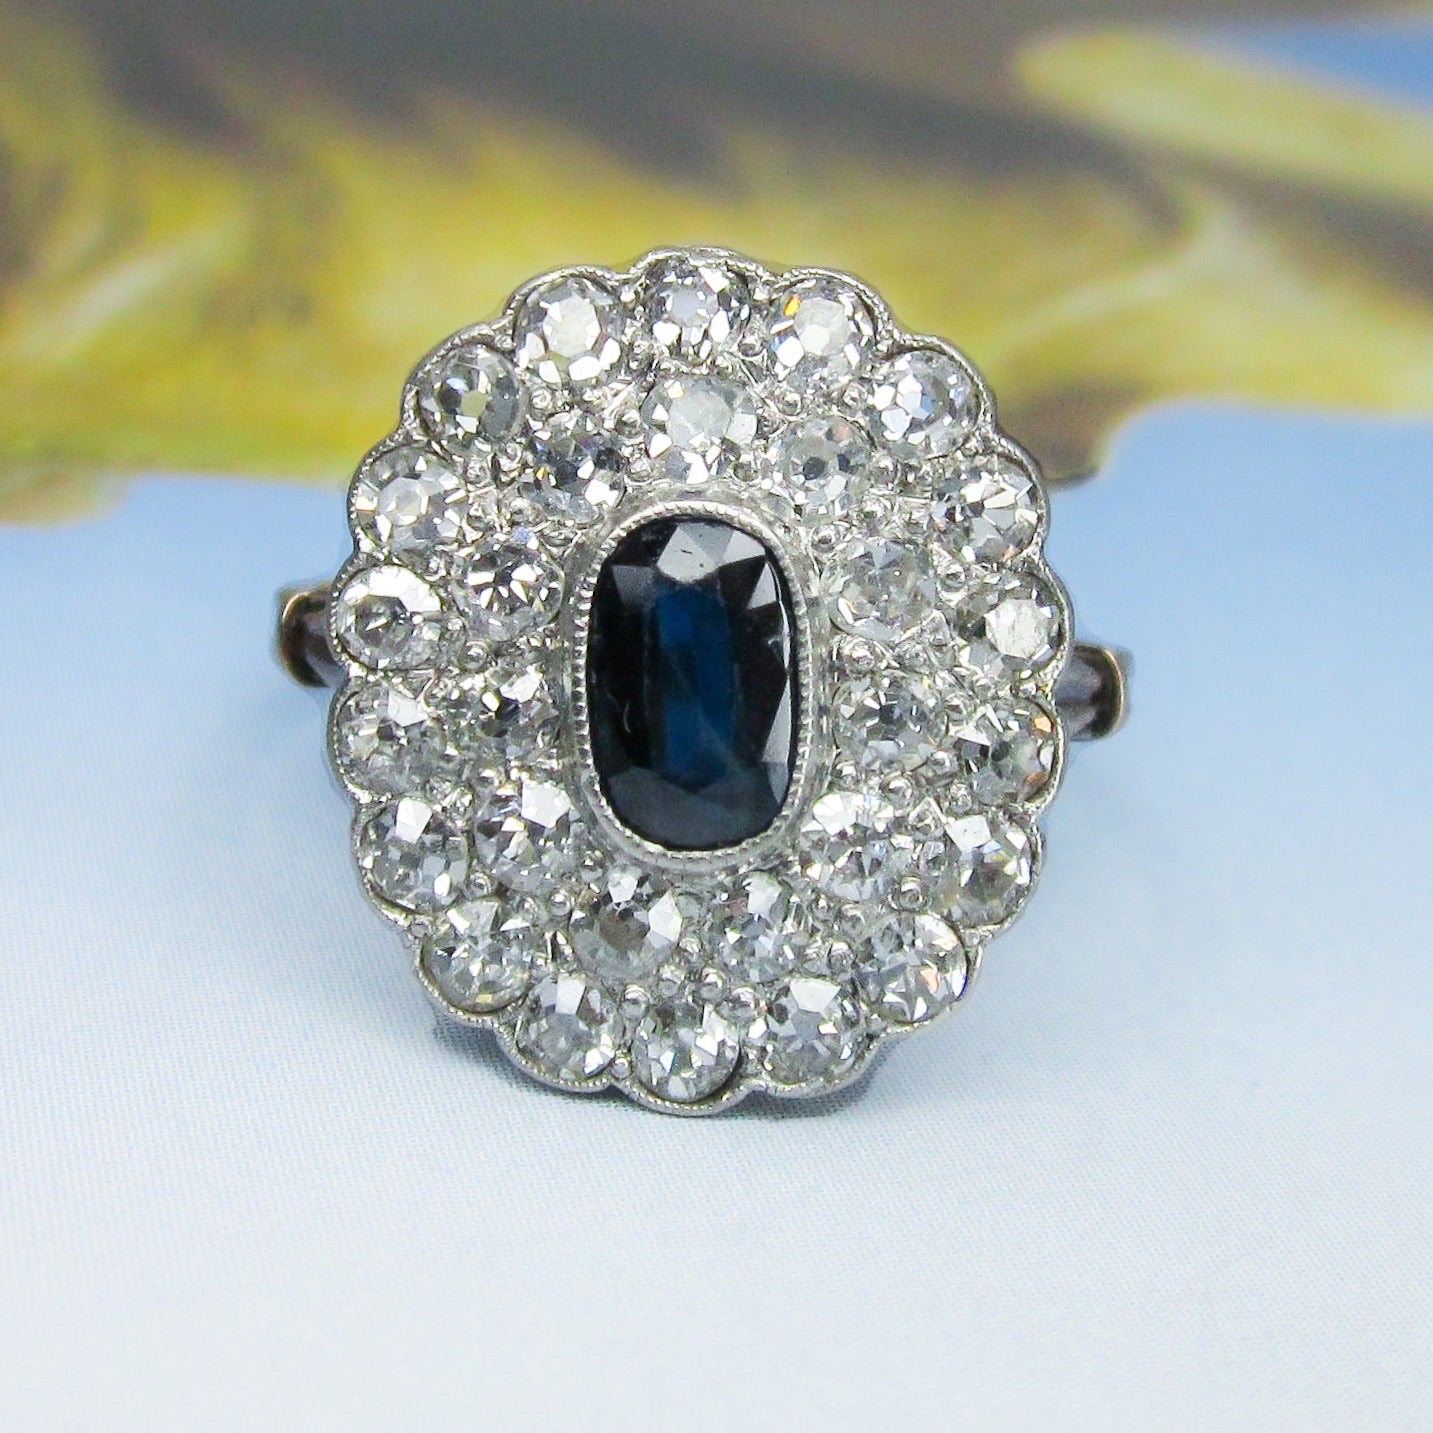 SOLD--Edwardian Sapphire and Diamond Cluster Ring Platinum/14k c. 1910